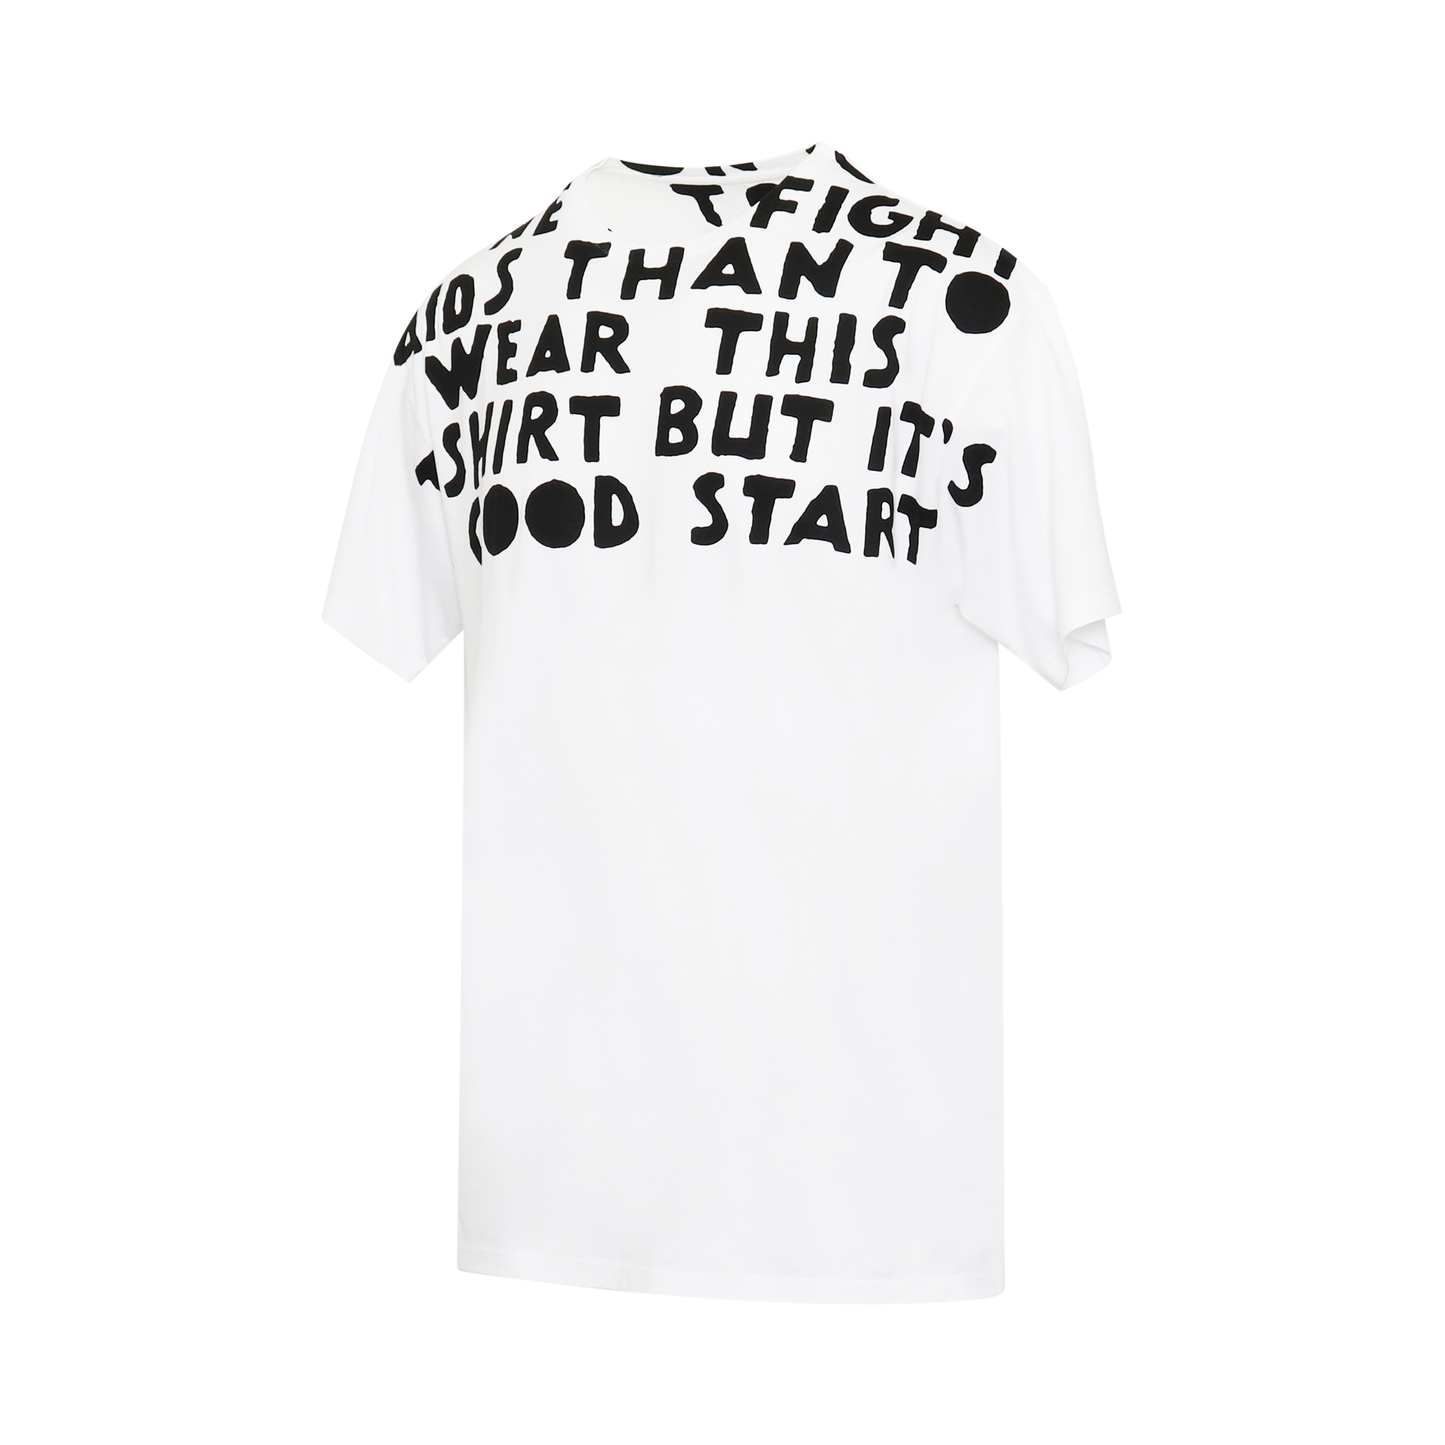 AIDS Charity T-Shirt in White